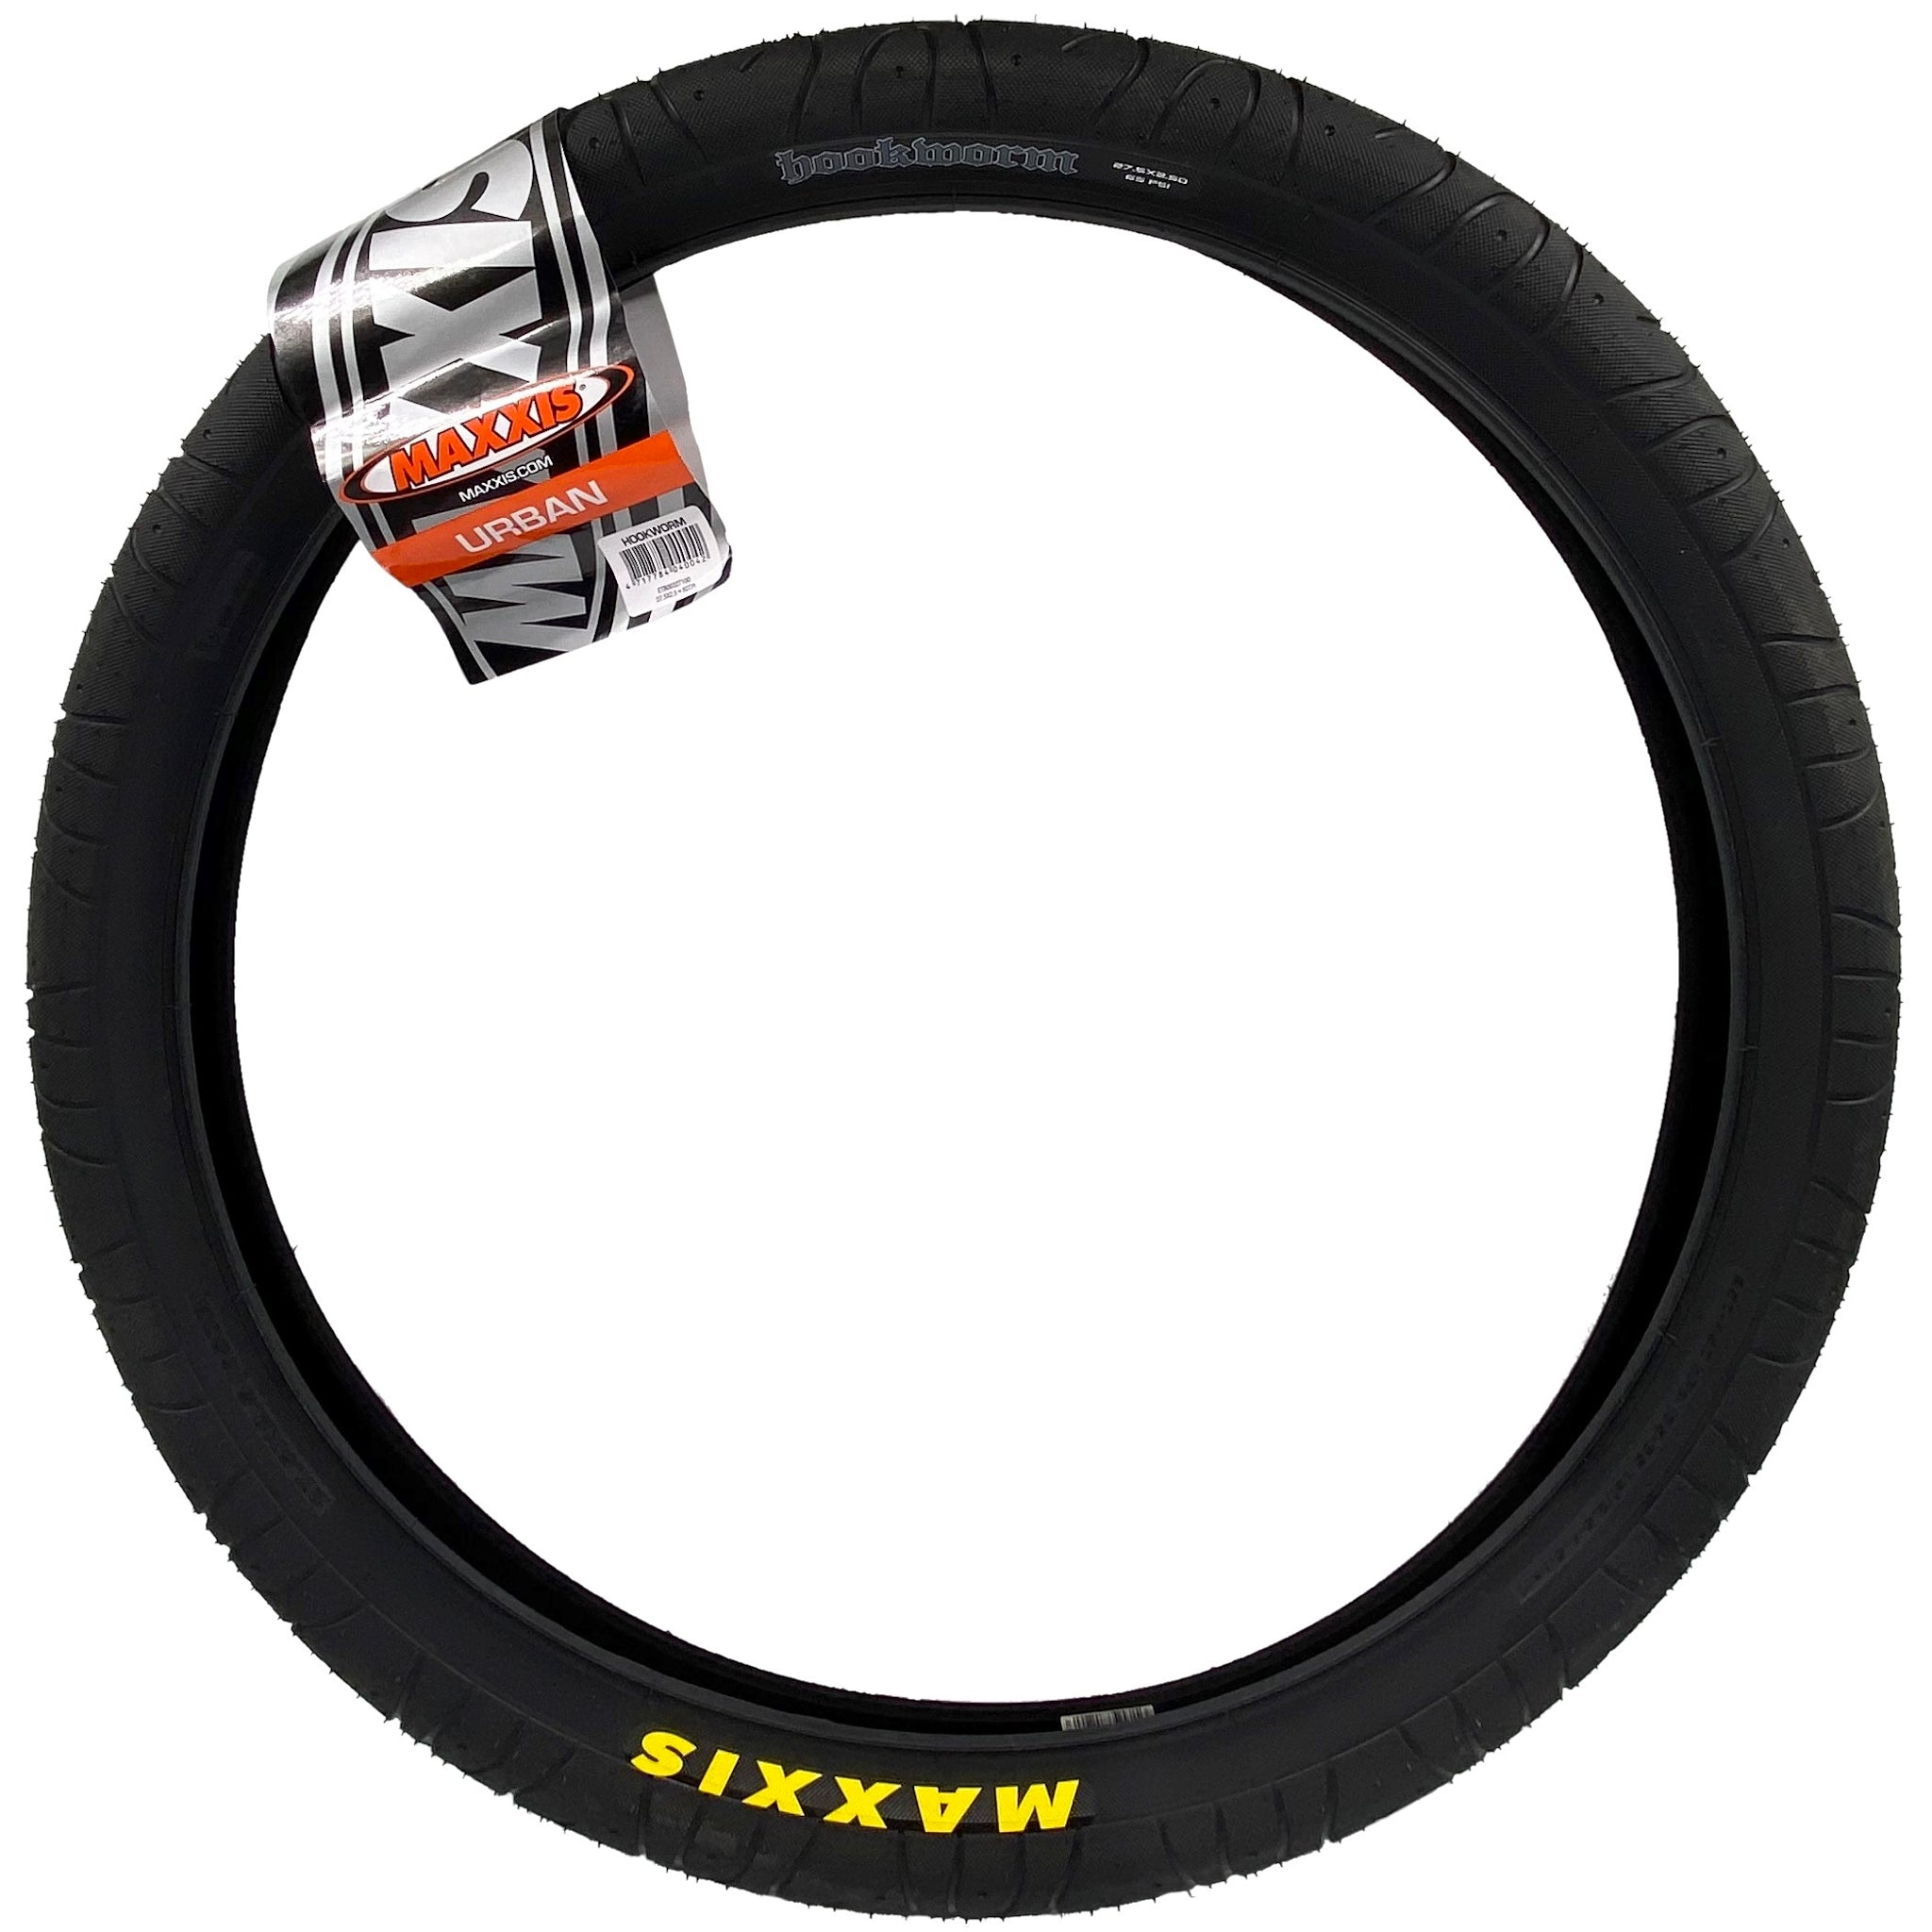 Photo of the side of the Maxxis Hookworm 27.5"x2.5 tire.